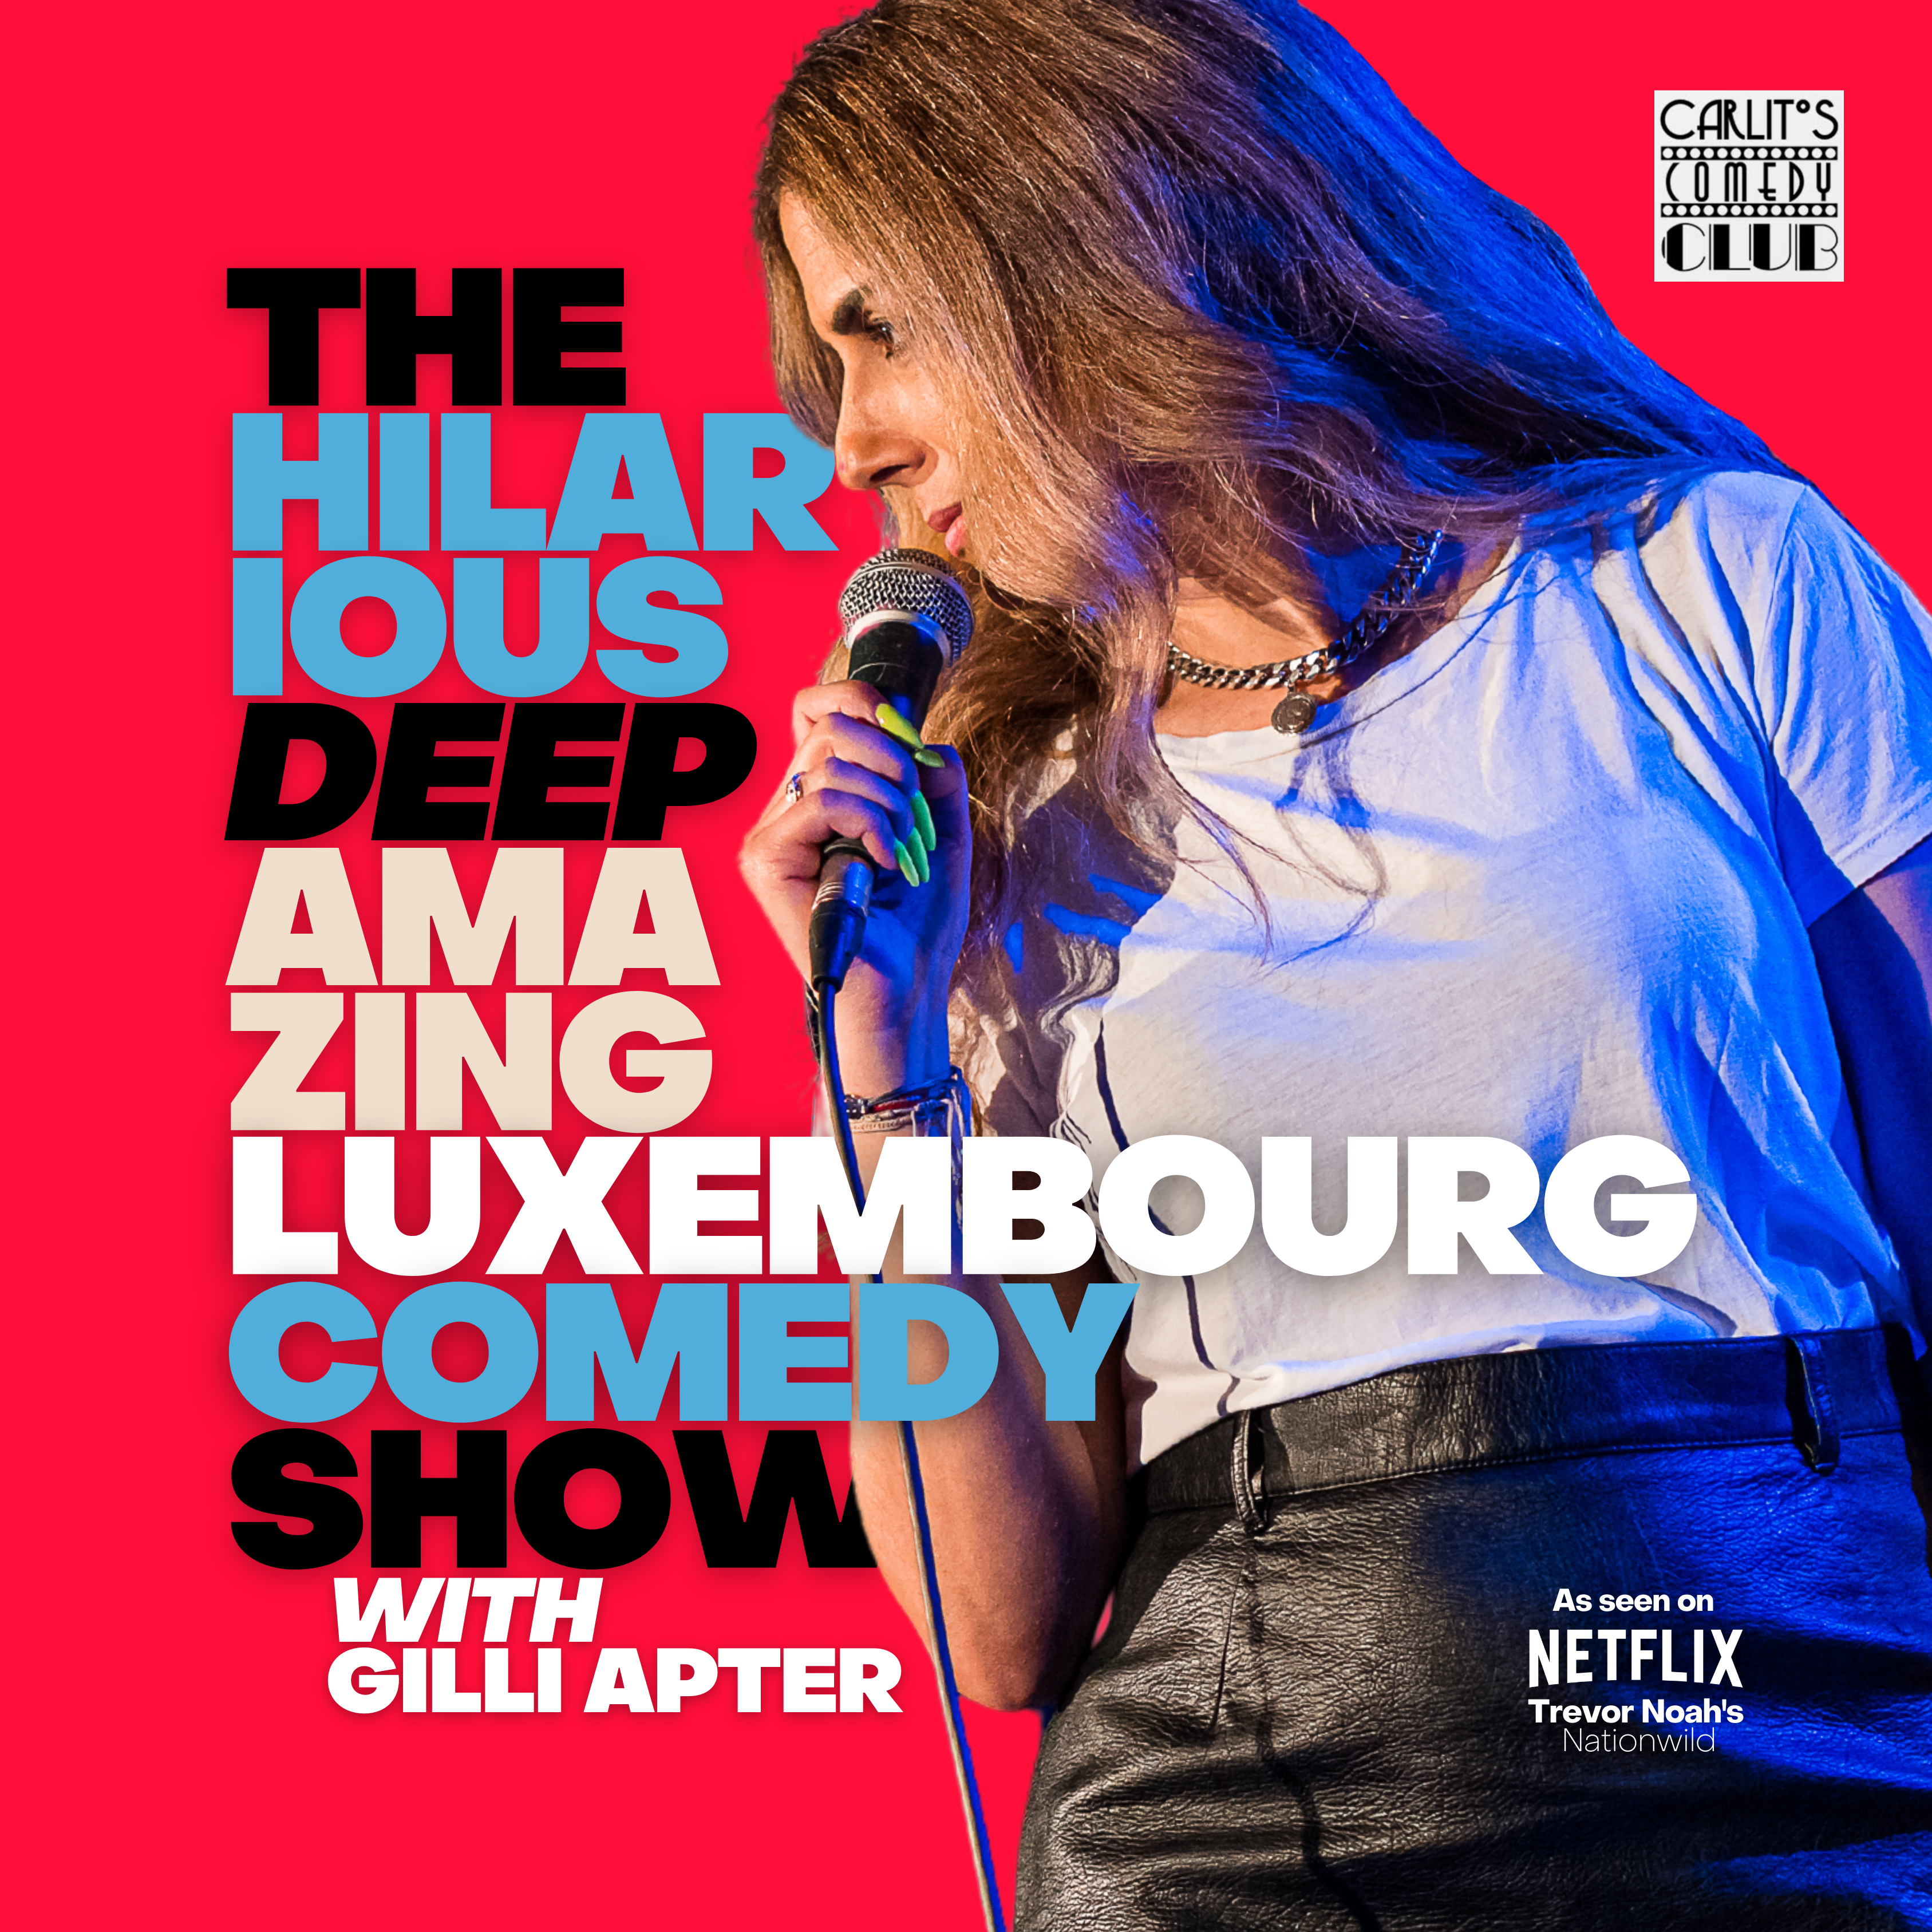 Gilli Apter - The Hilarious Deep Amazing Luxembourg Comedy show